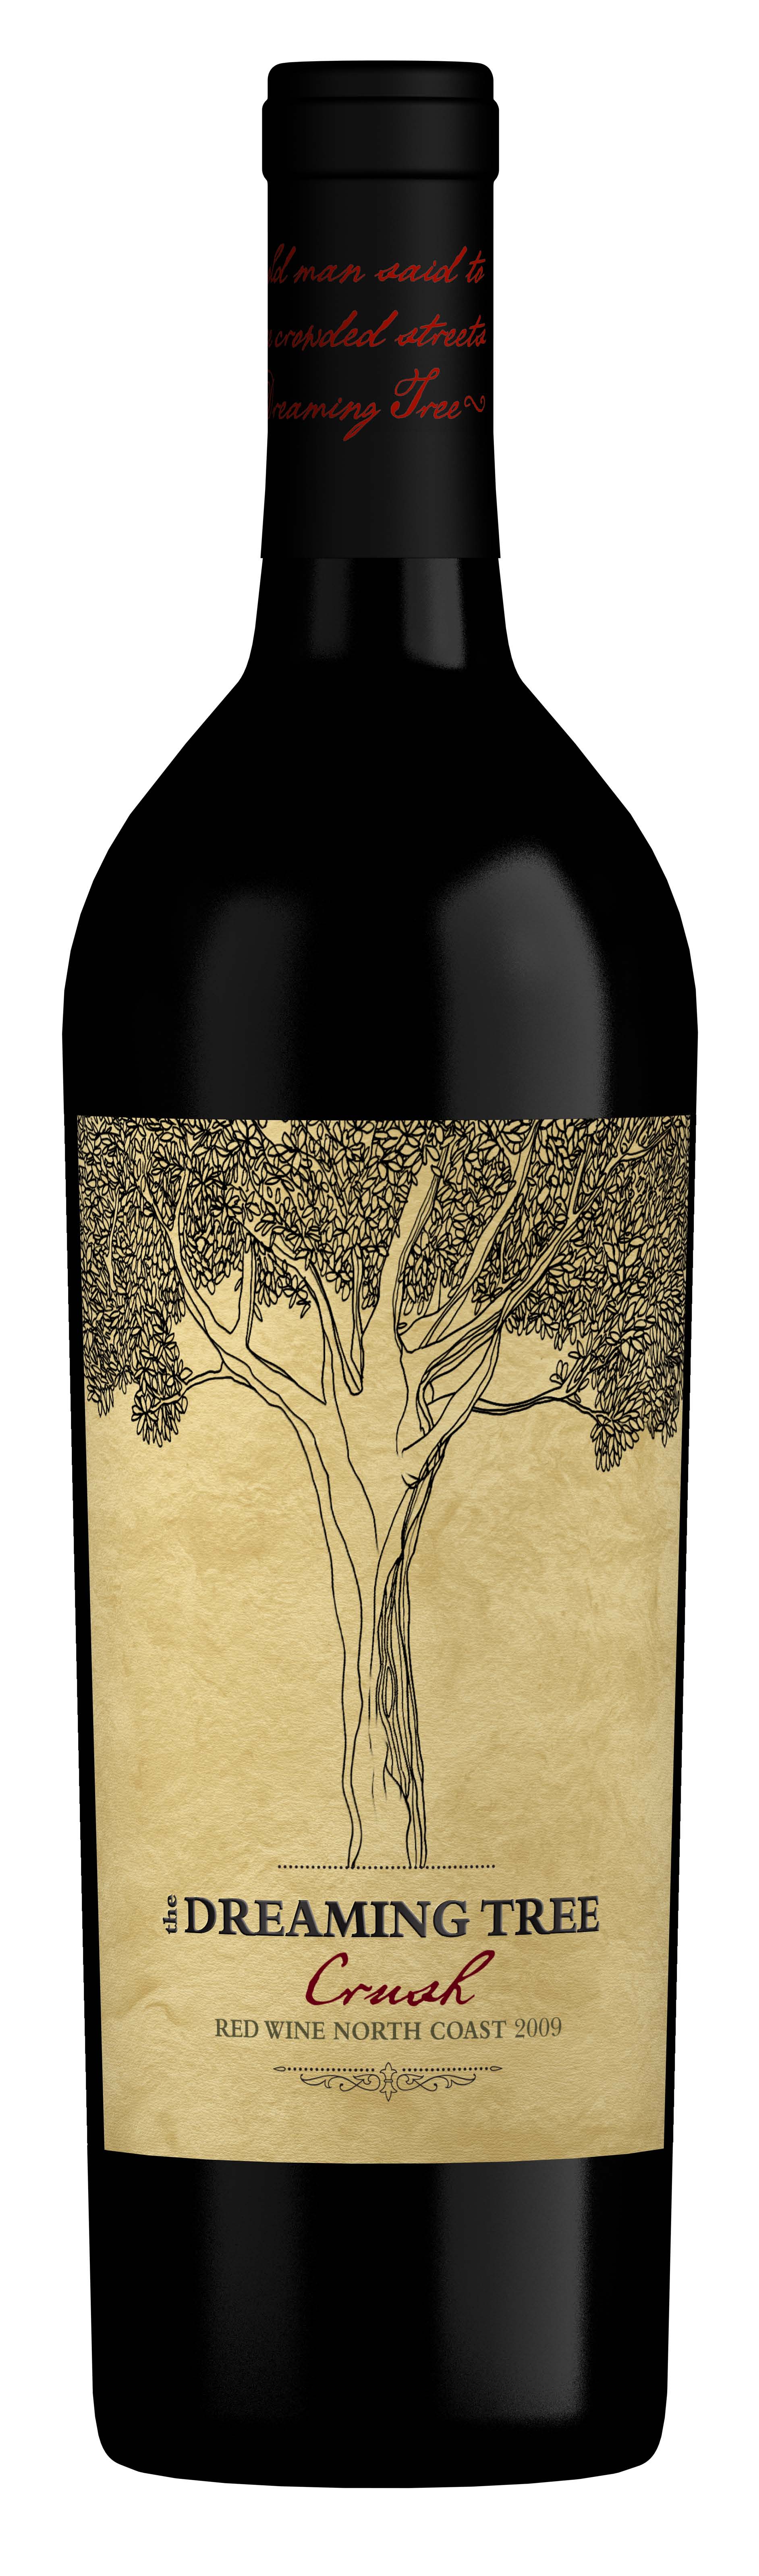 images/wine/Red Wine/The Dreaming Tree Crush.gif